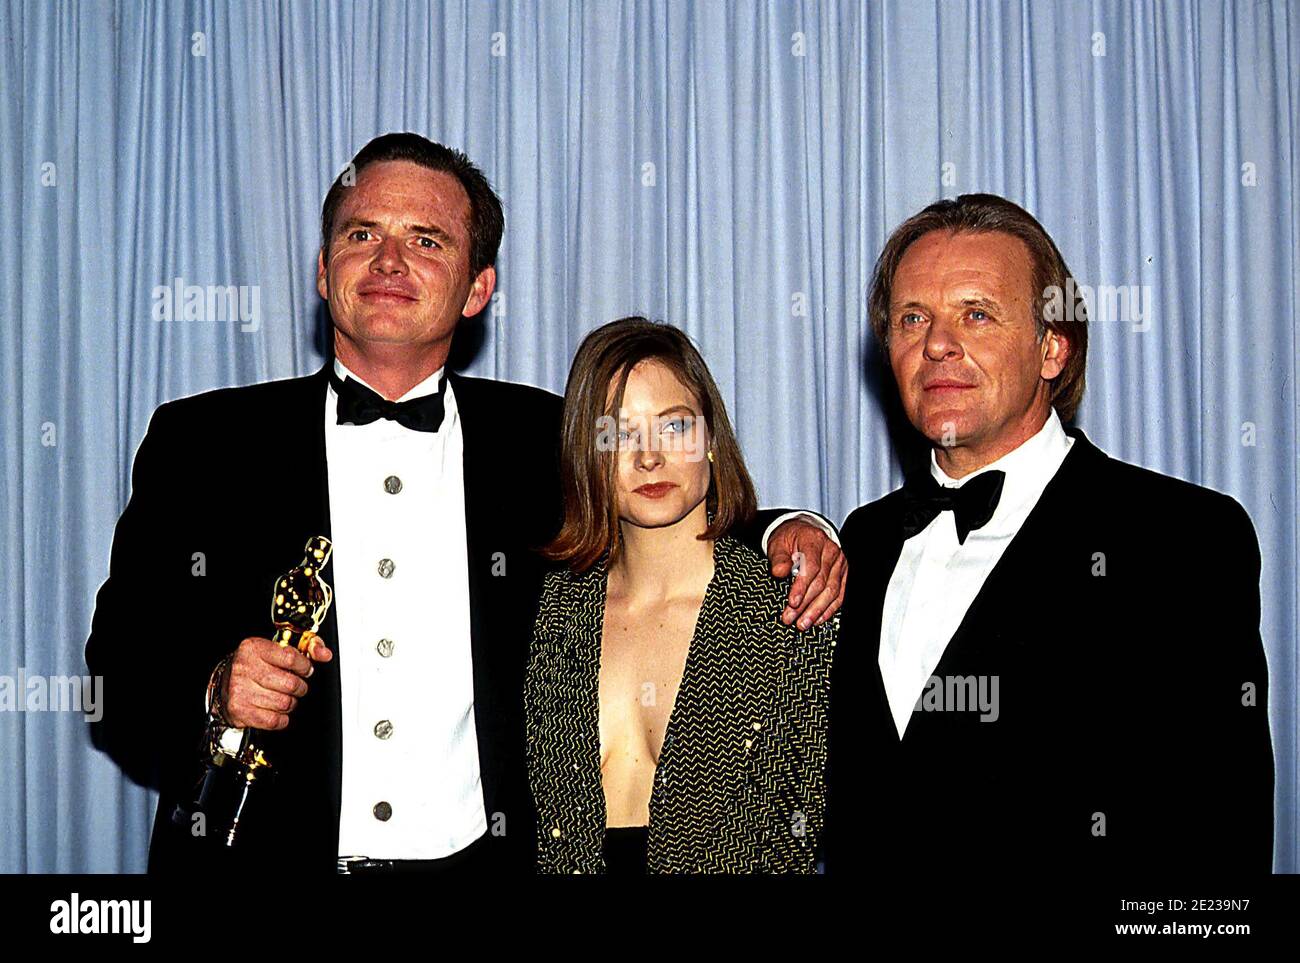 Michael Blake, winner Best Adapted Screenplay for 'Dances with Wolves,' with presenters Jodie Foster and Anthony Hopkins at the 63rd Annual Academy Awards on March 25, 1991.  Credit: Ralph Dominguez/MediaPunch Stock Photo